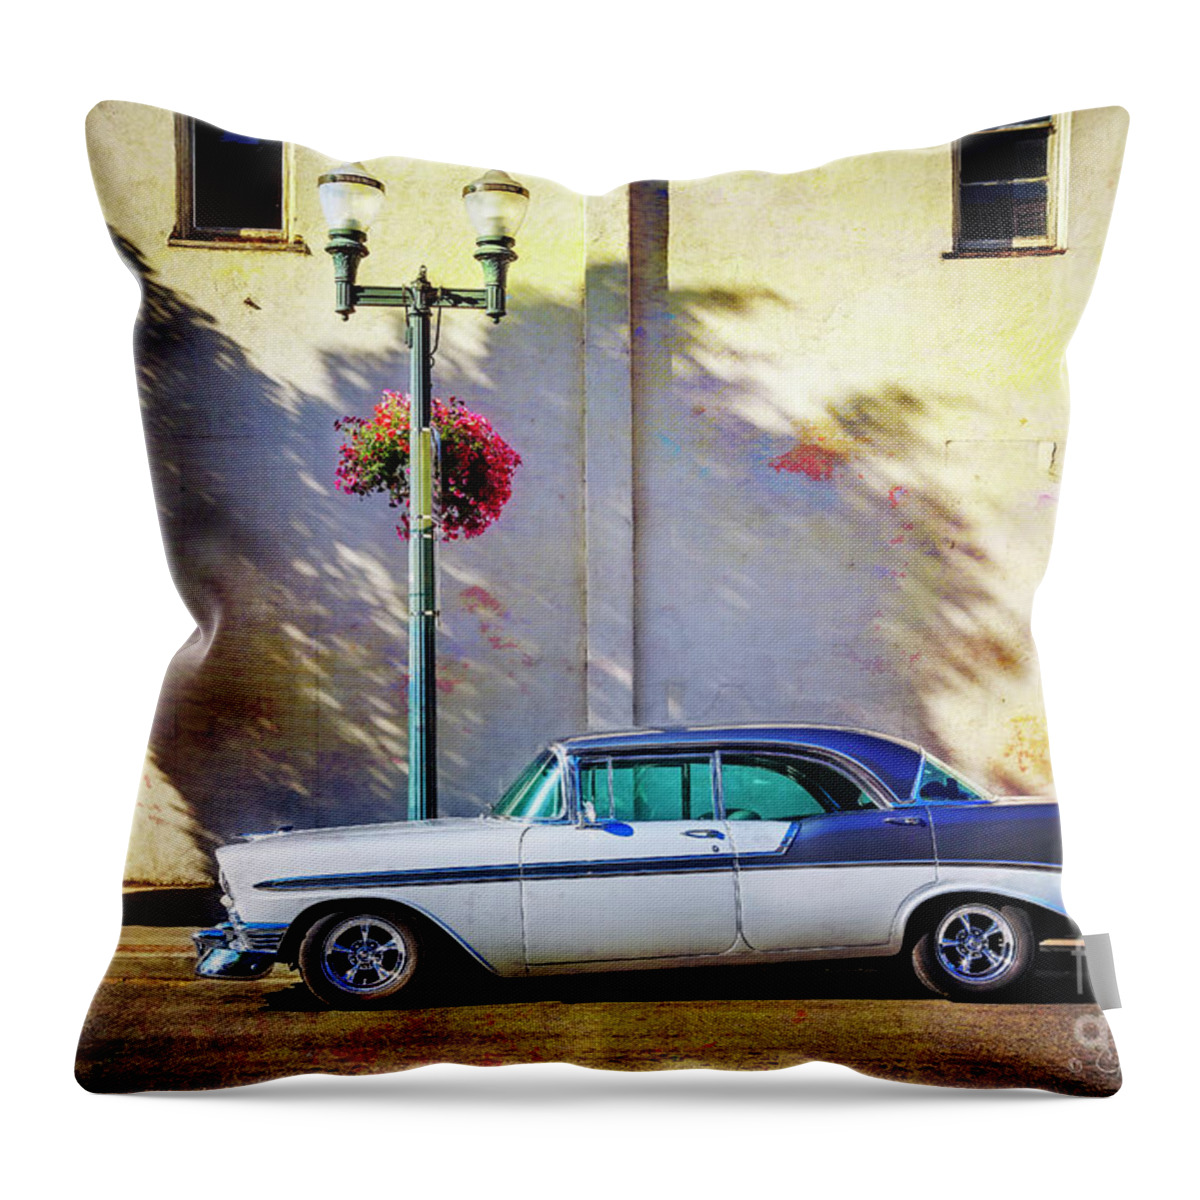 Tranquility Throw Pillow featuring the photograph Hot Rod Bel-Air by Craig J Satterlee